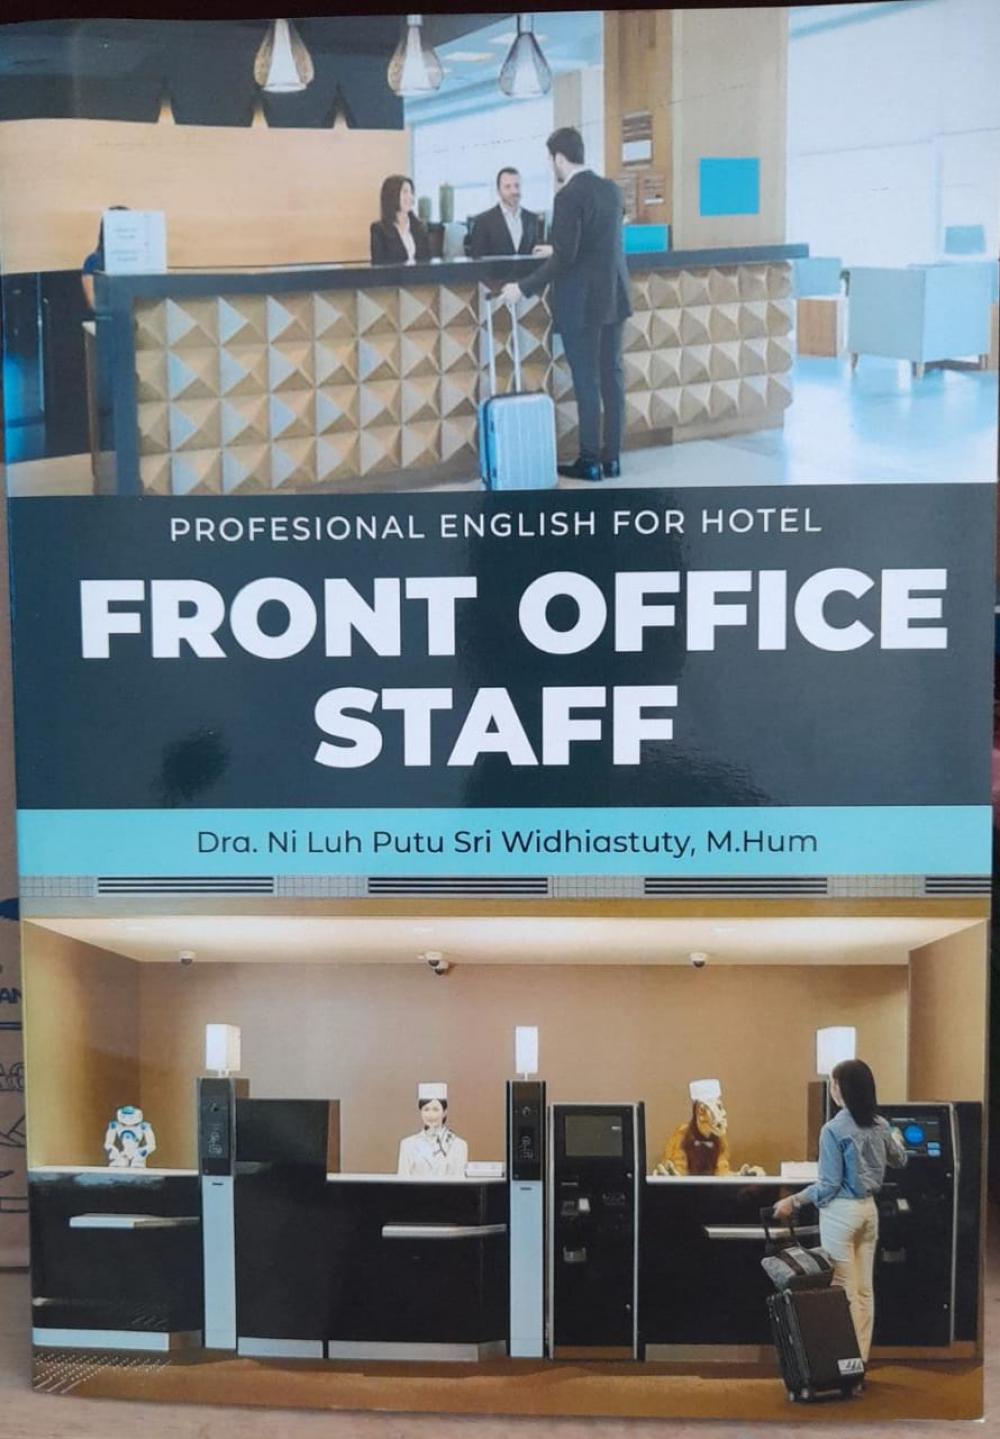 Professional English for Hotel Front Office Staff